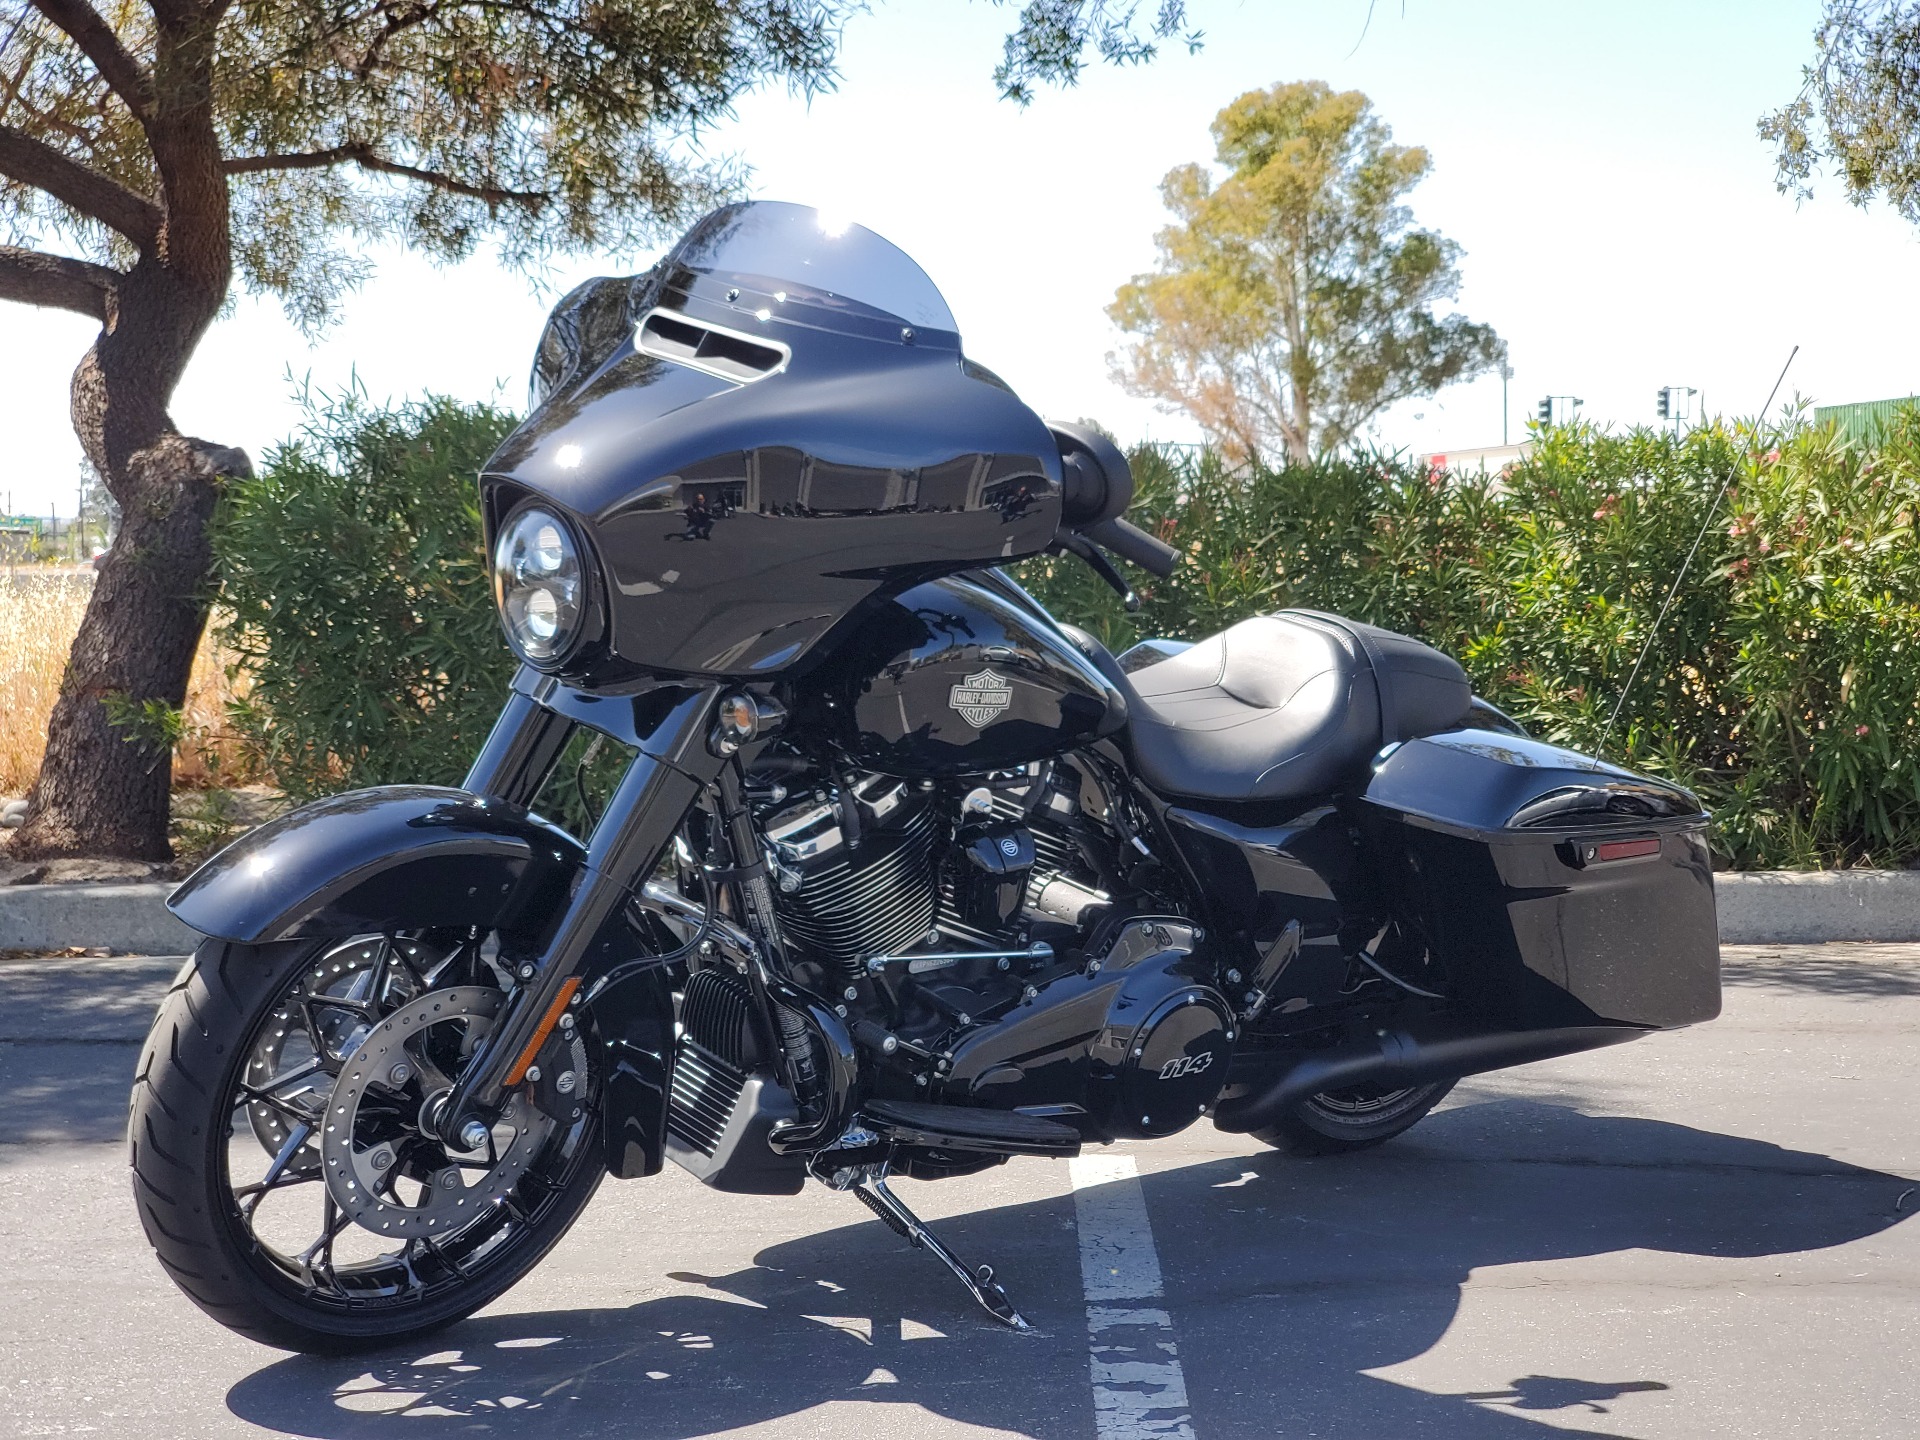 2022 Harley-Davidson Street Glide® Special in Livermore, California - Photo 3